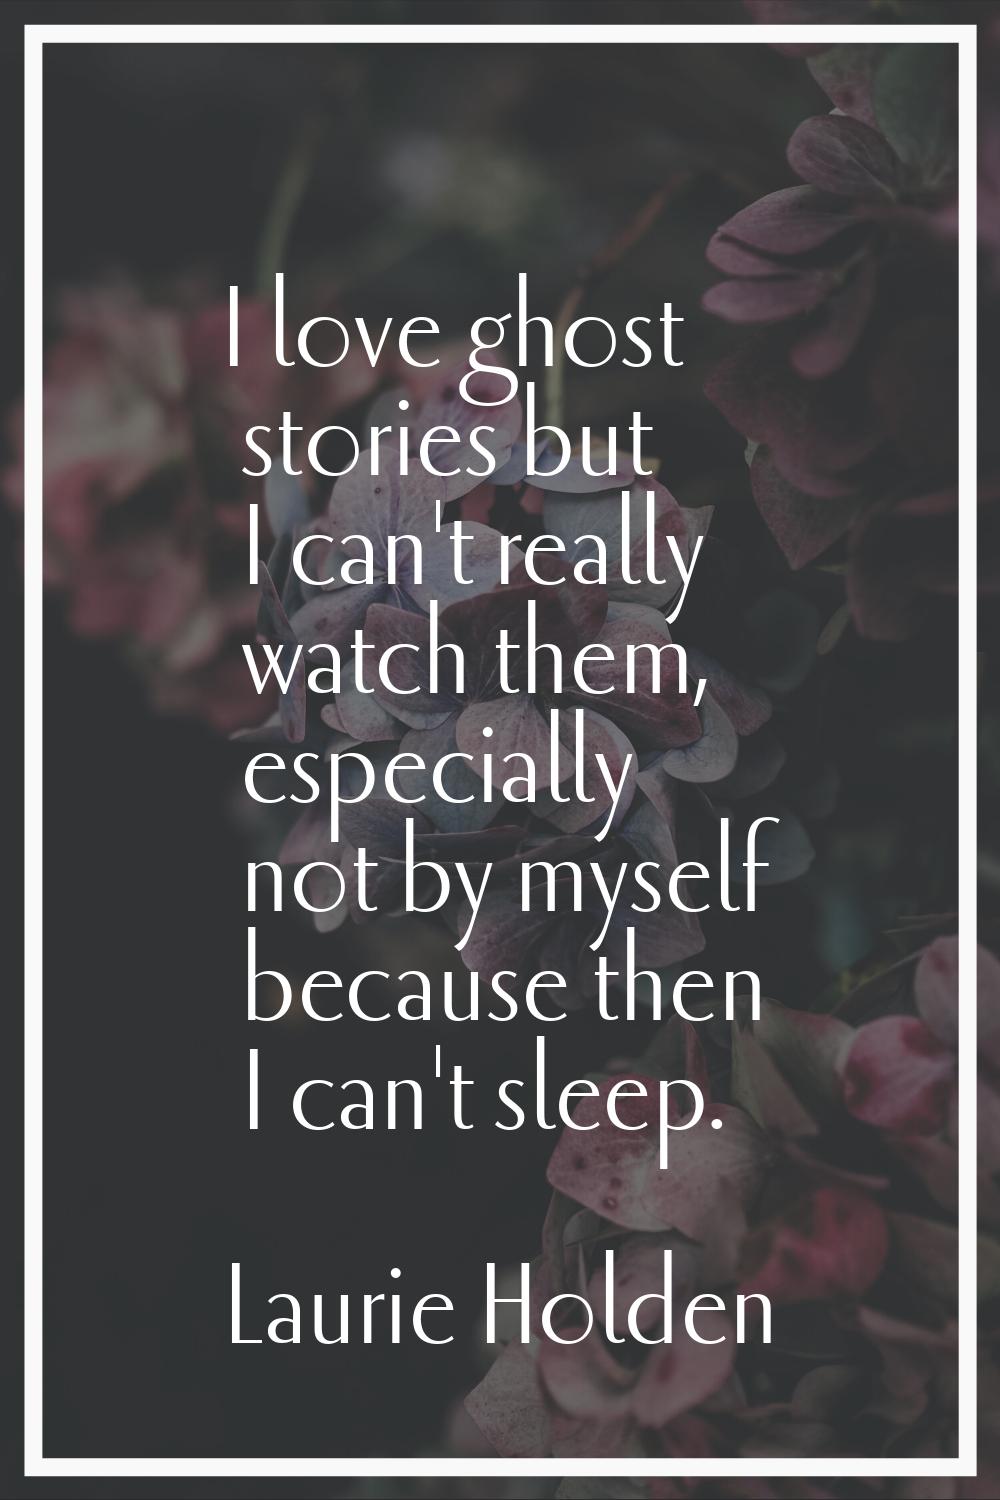 I love ghost stories but I can't really watch them, especially not by myself because then I can't s